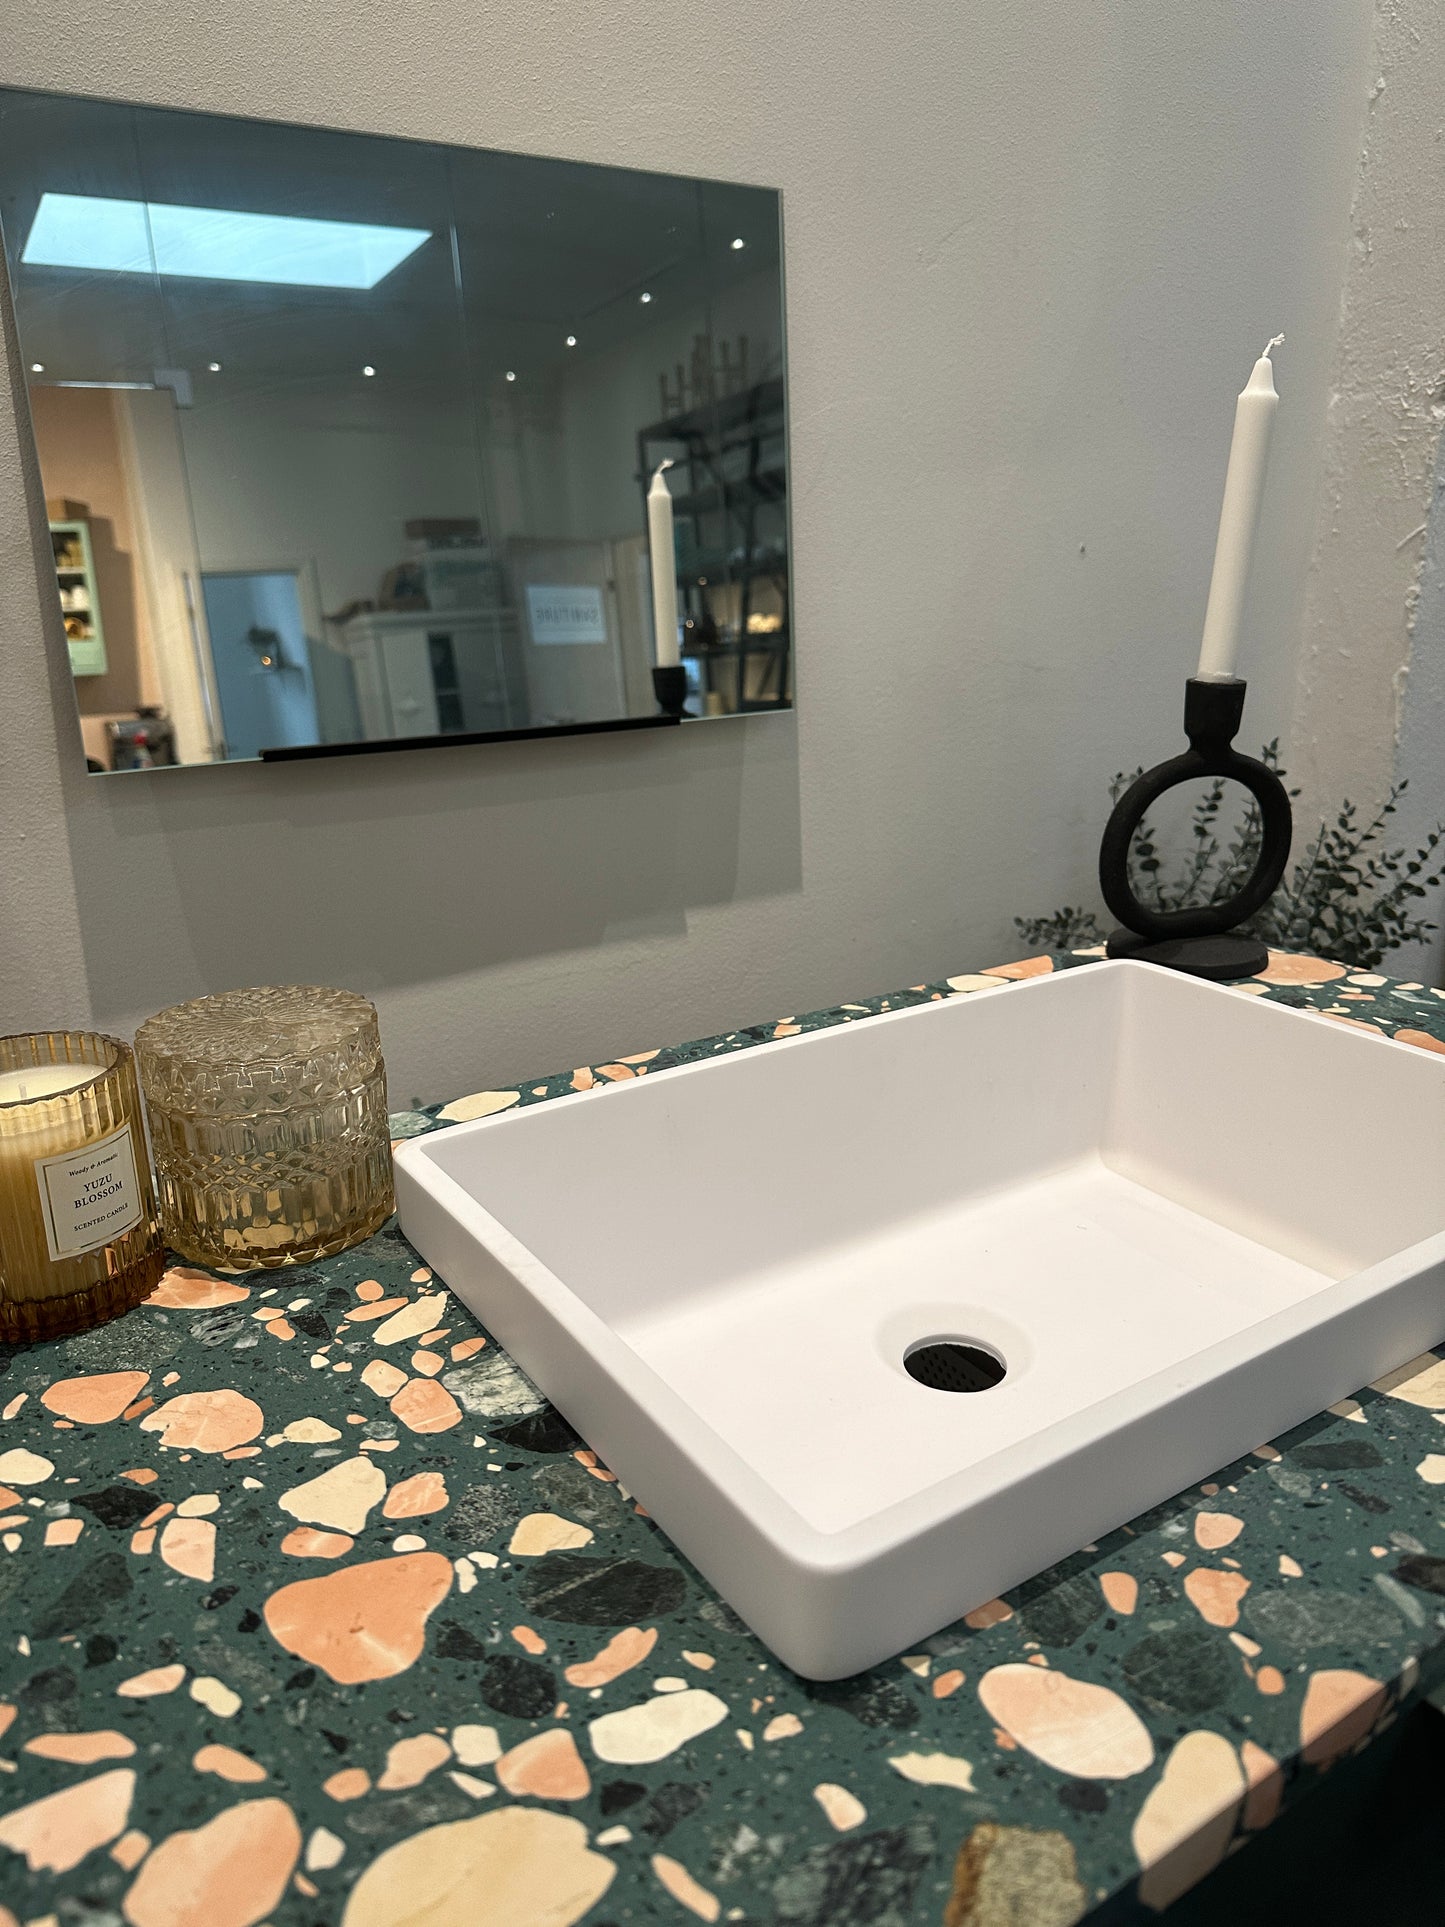 OUTLET H2 80cm, toniton green, terrazzo og solid surface